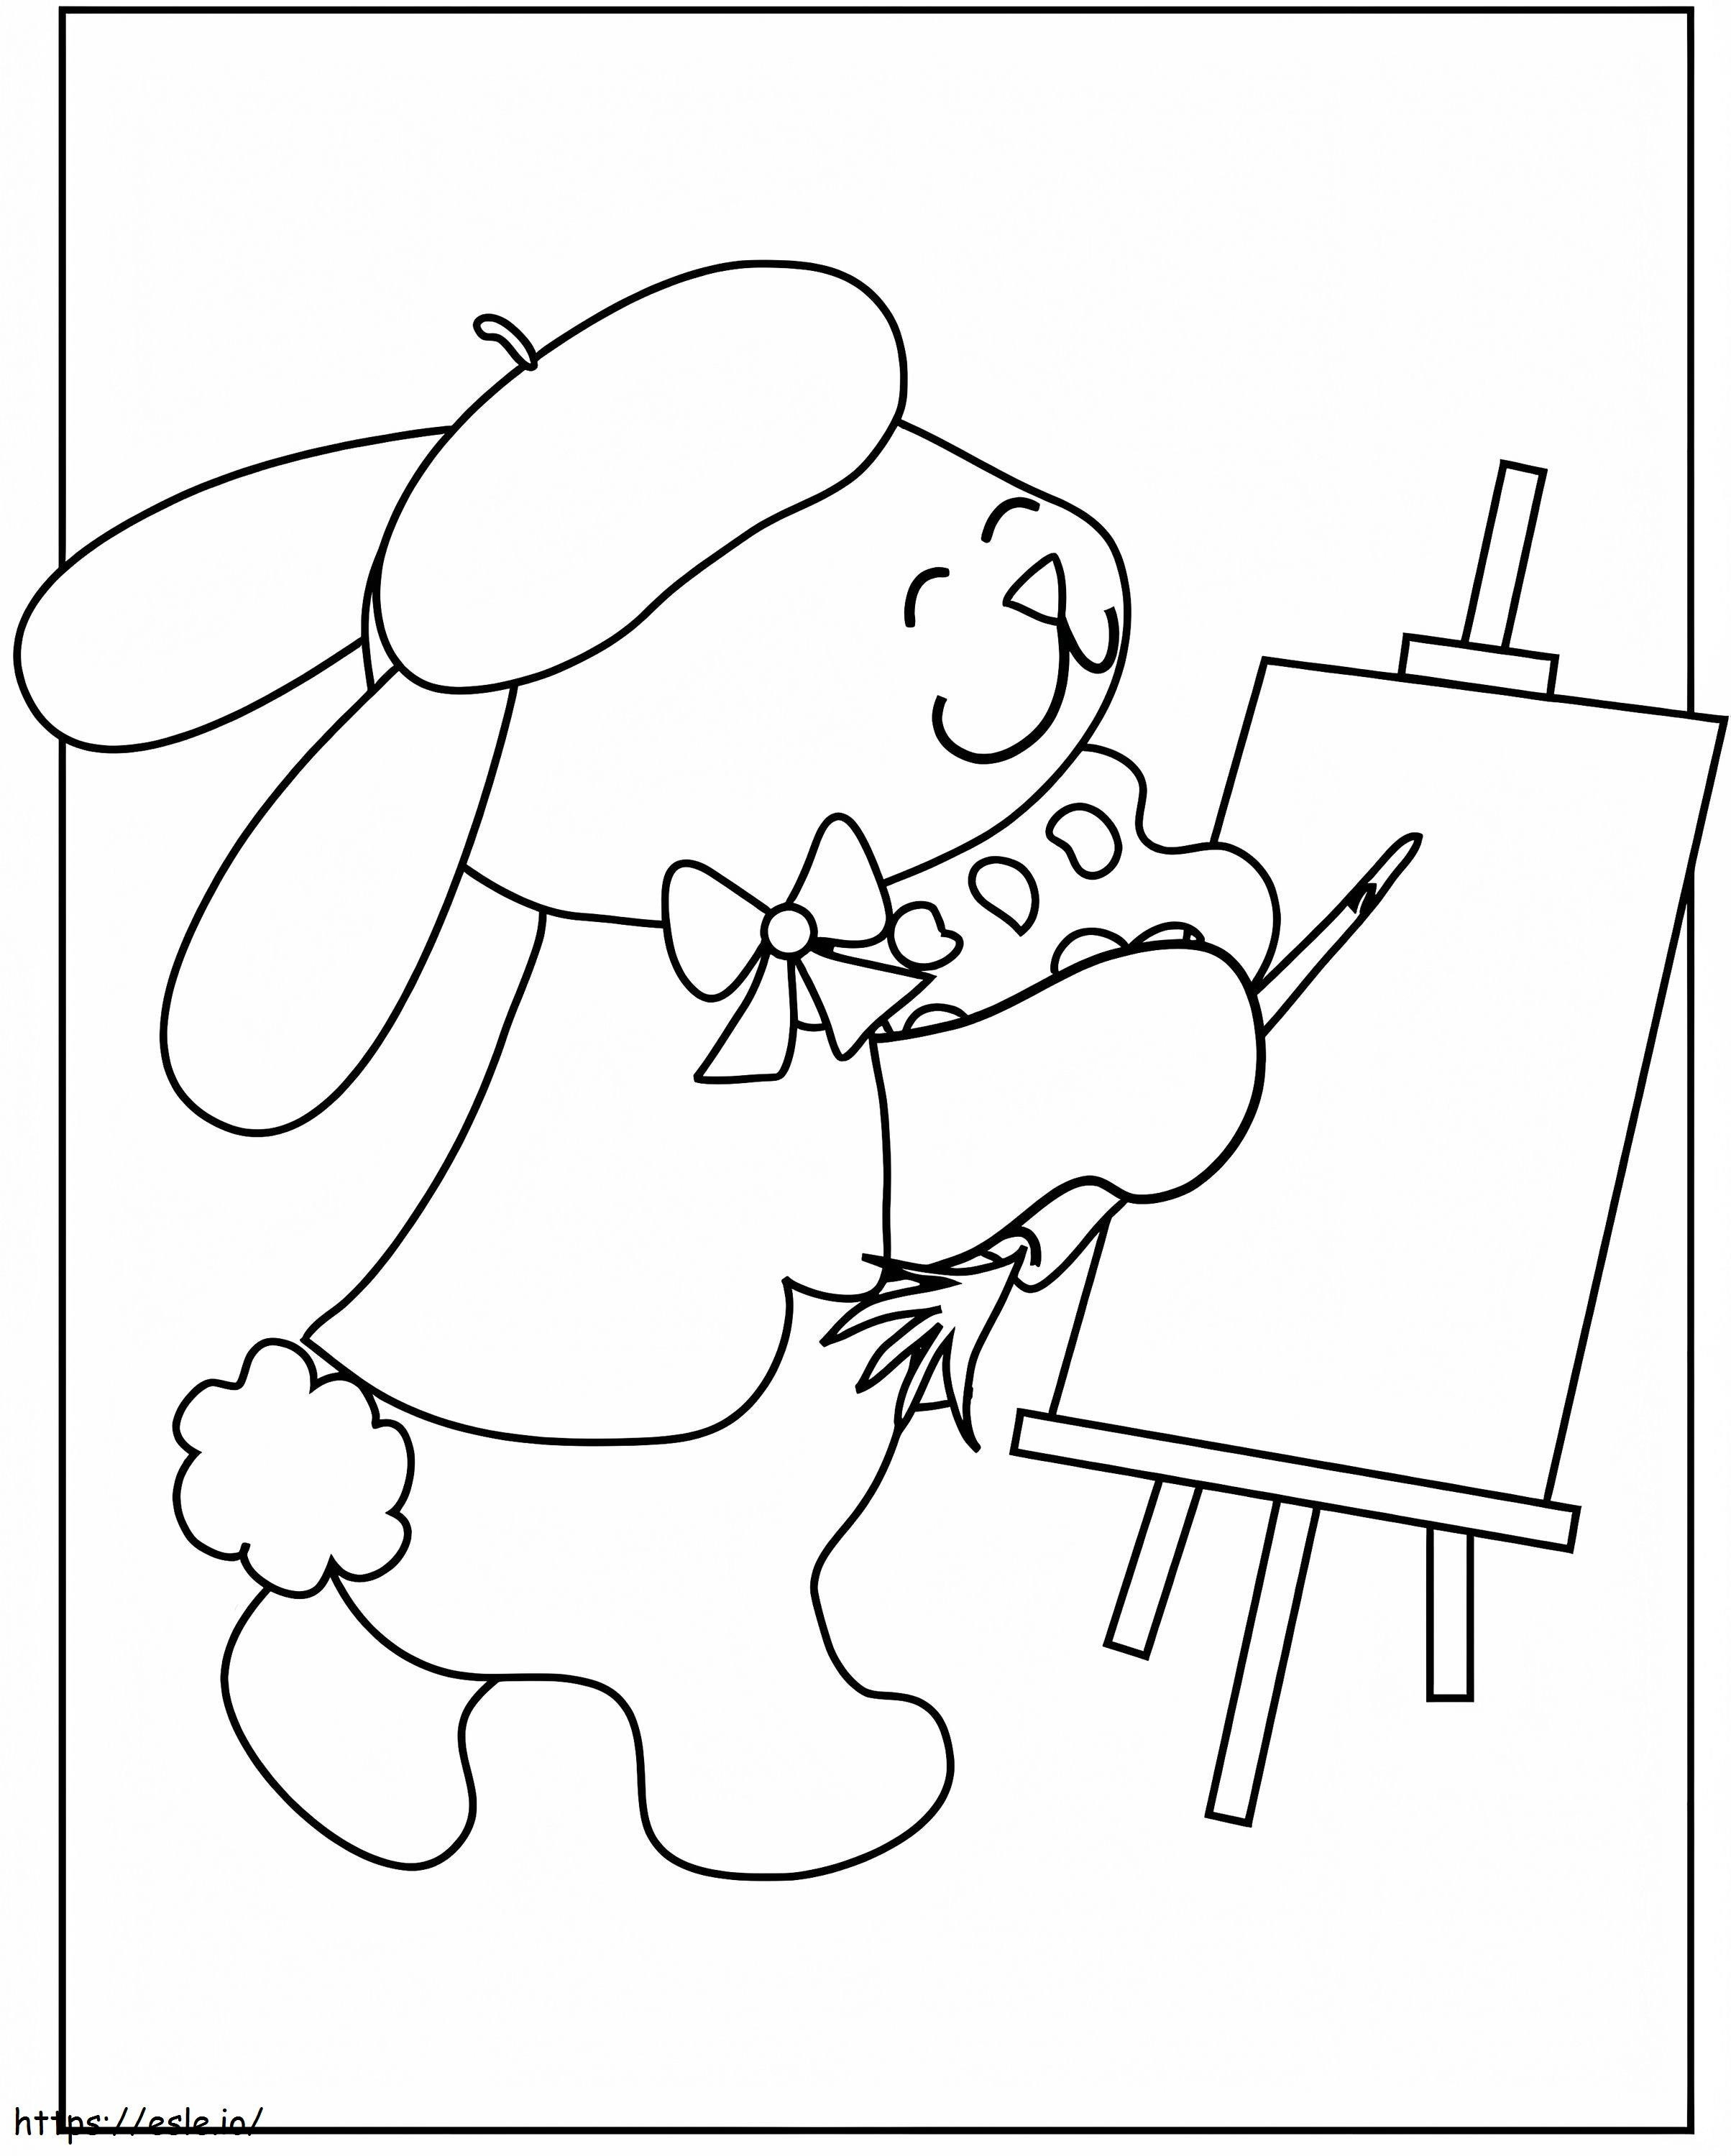 Bunny Artist coloring page